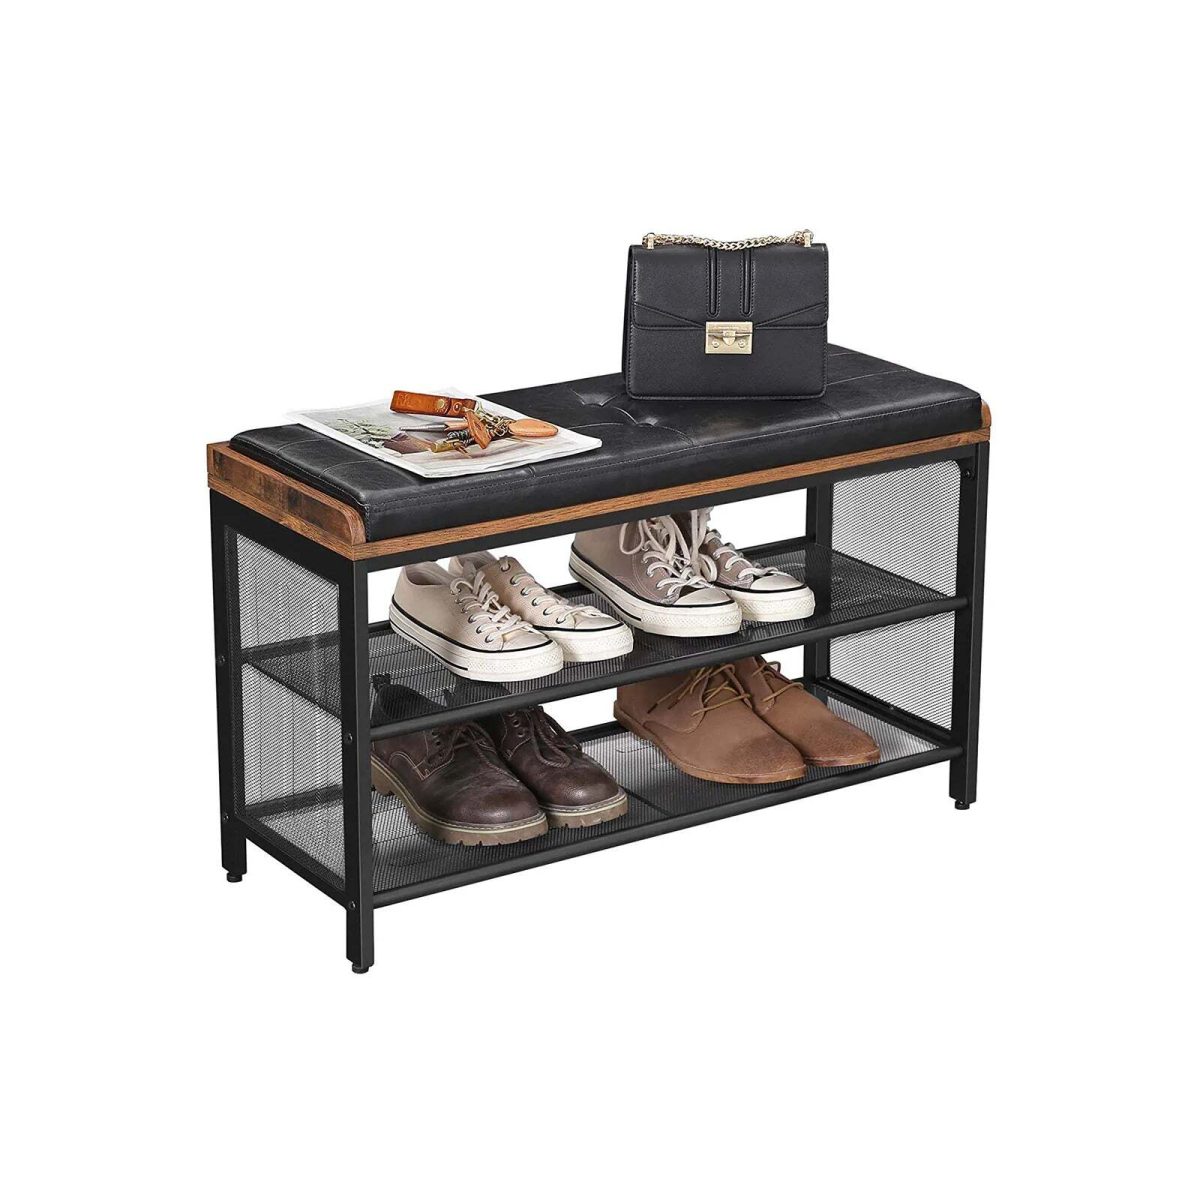 VASAGLE 3 Tier Shoe Storage Bench with Padded Seat